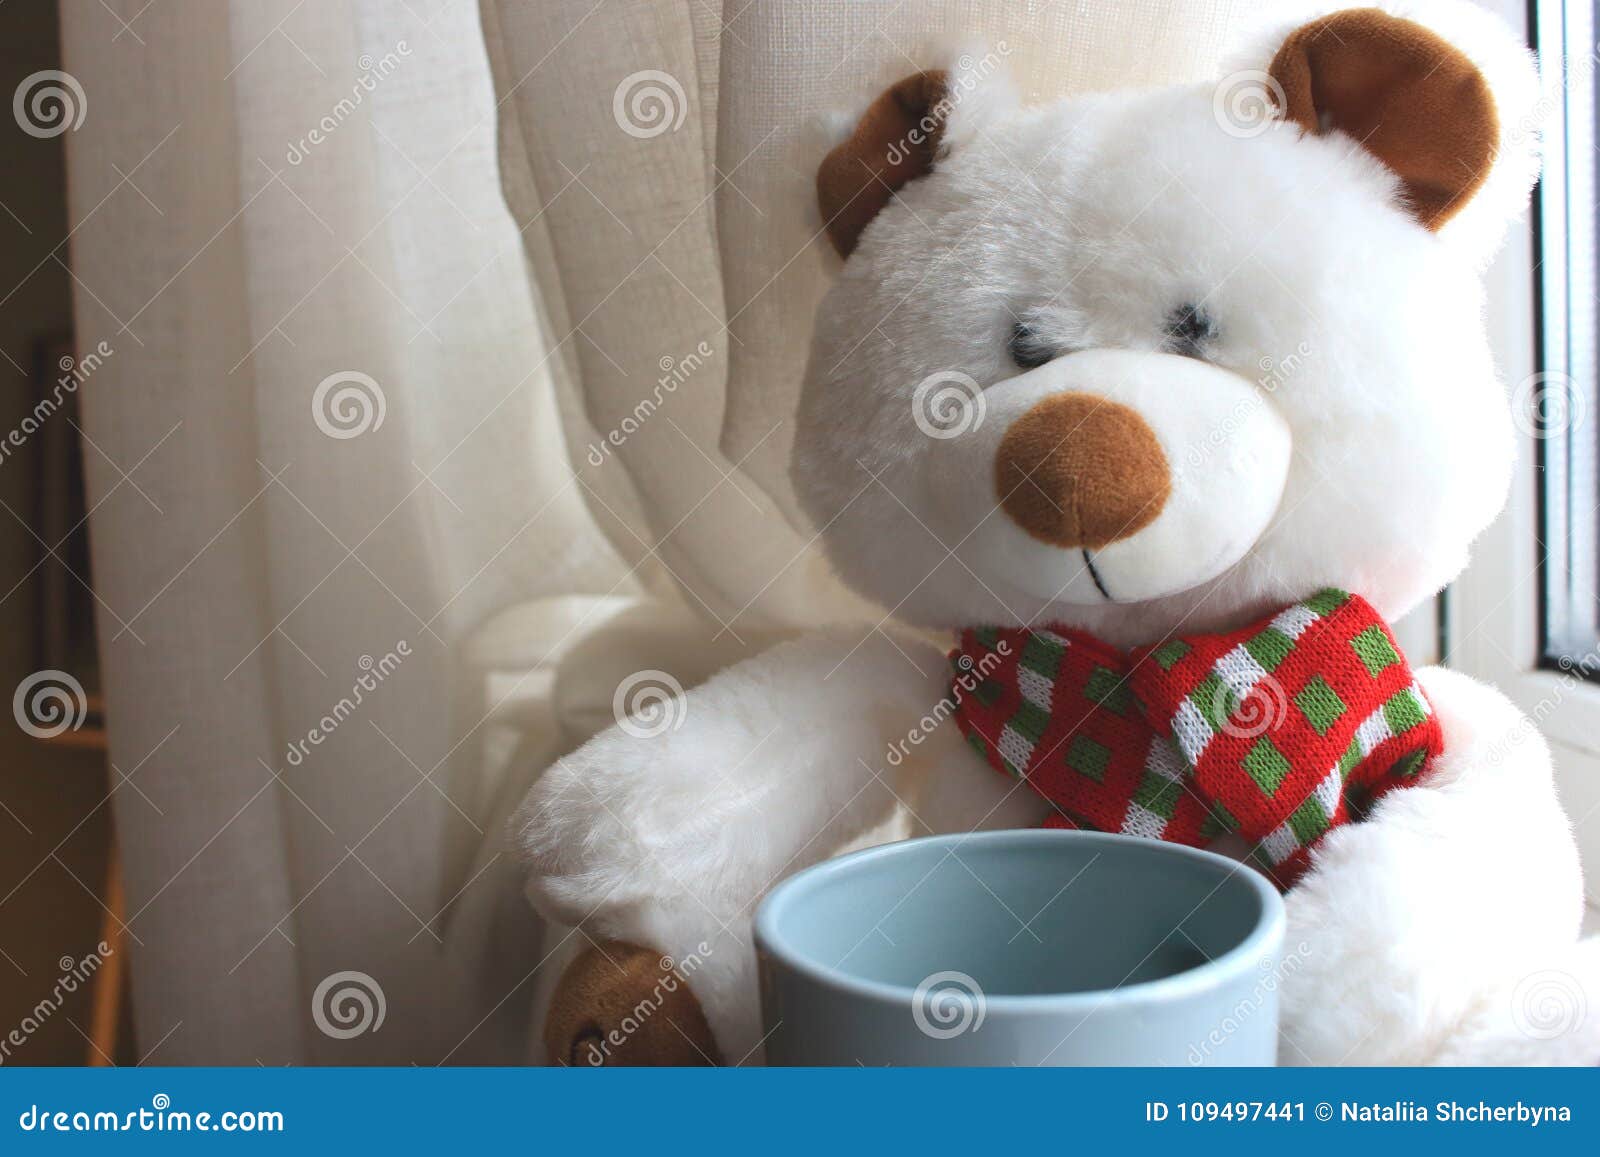 White Cute Teddy Bear with Cup Sitting on Window with Curtains ...